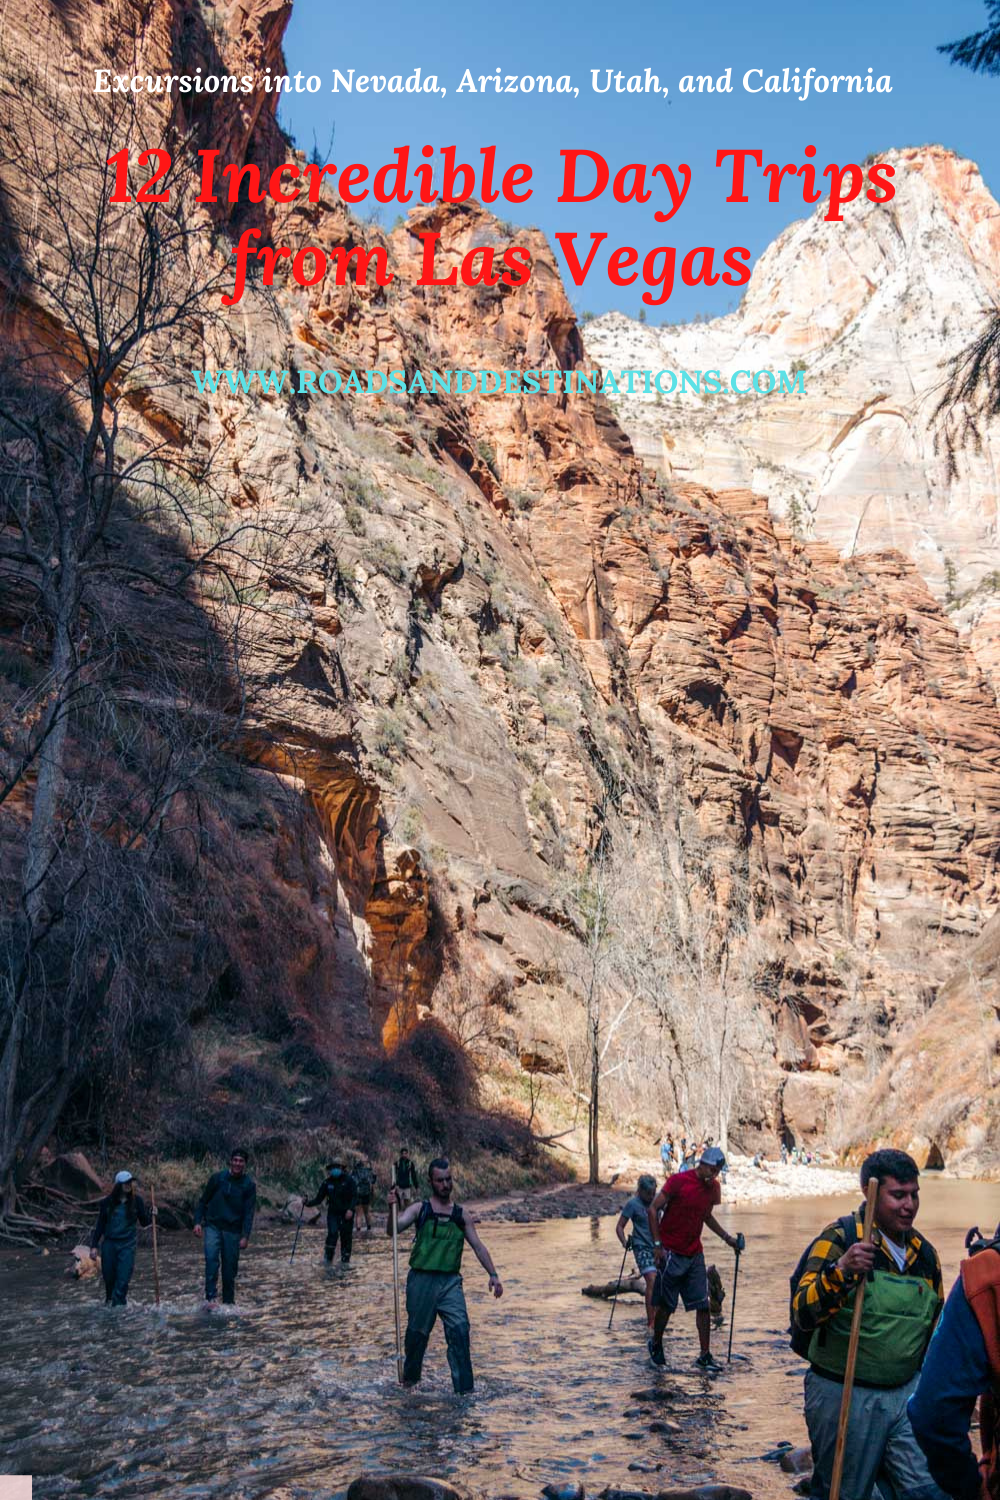 Day Trips from Las Vegas - Roads and Destinations